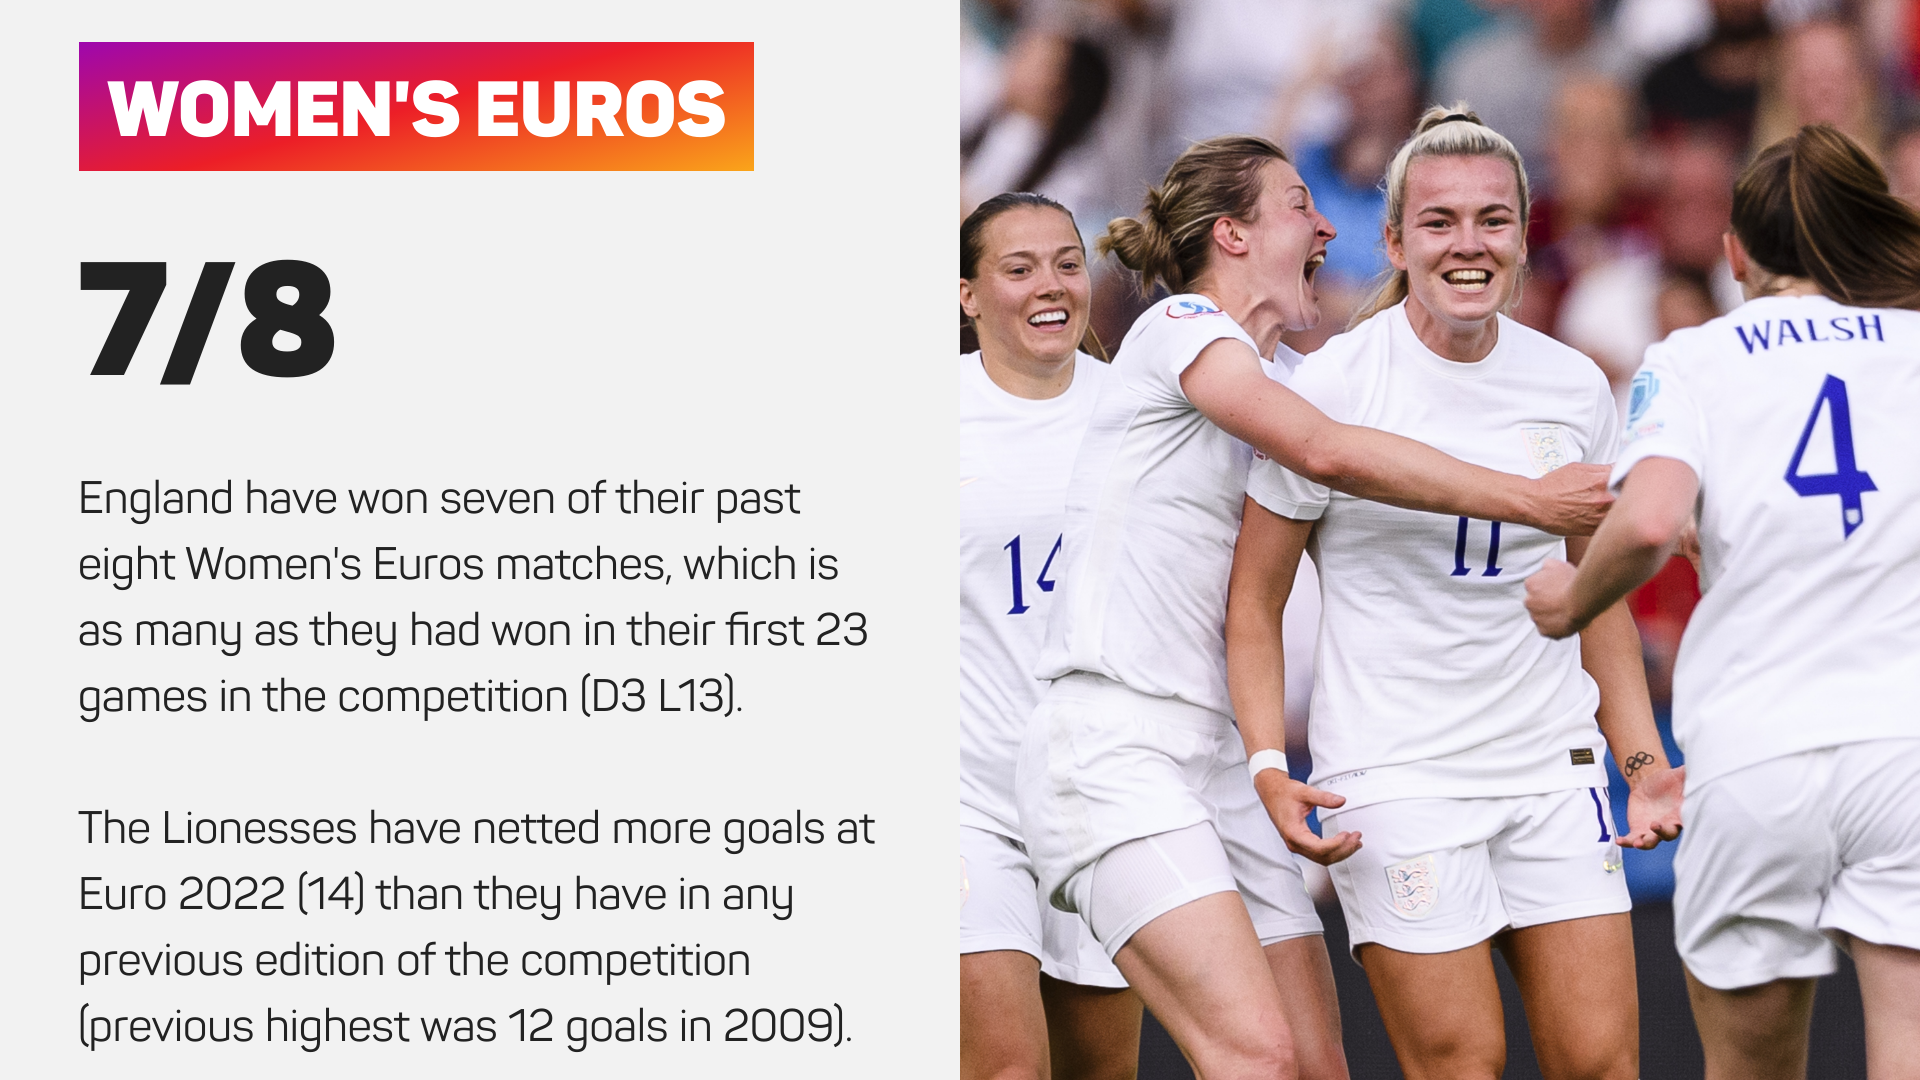 England have won seven of their past eight Women's Euros matches